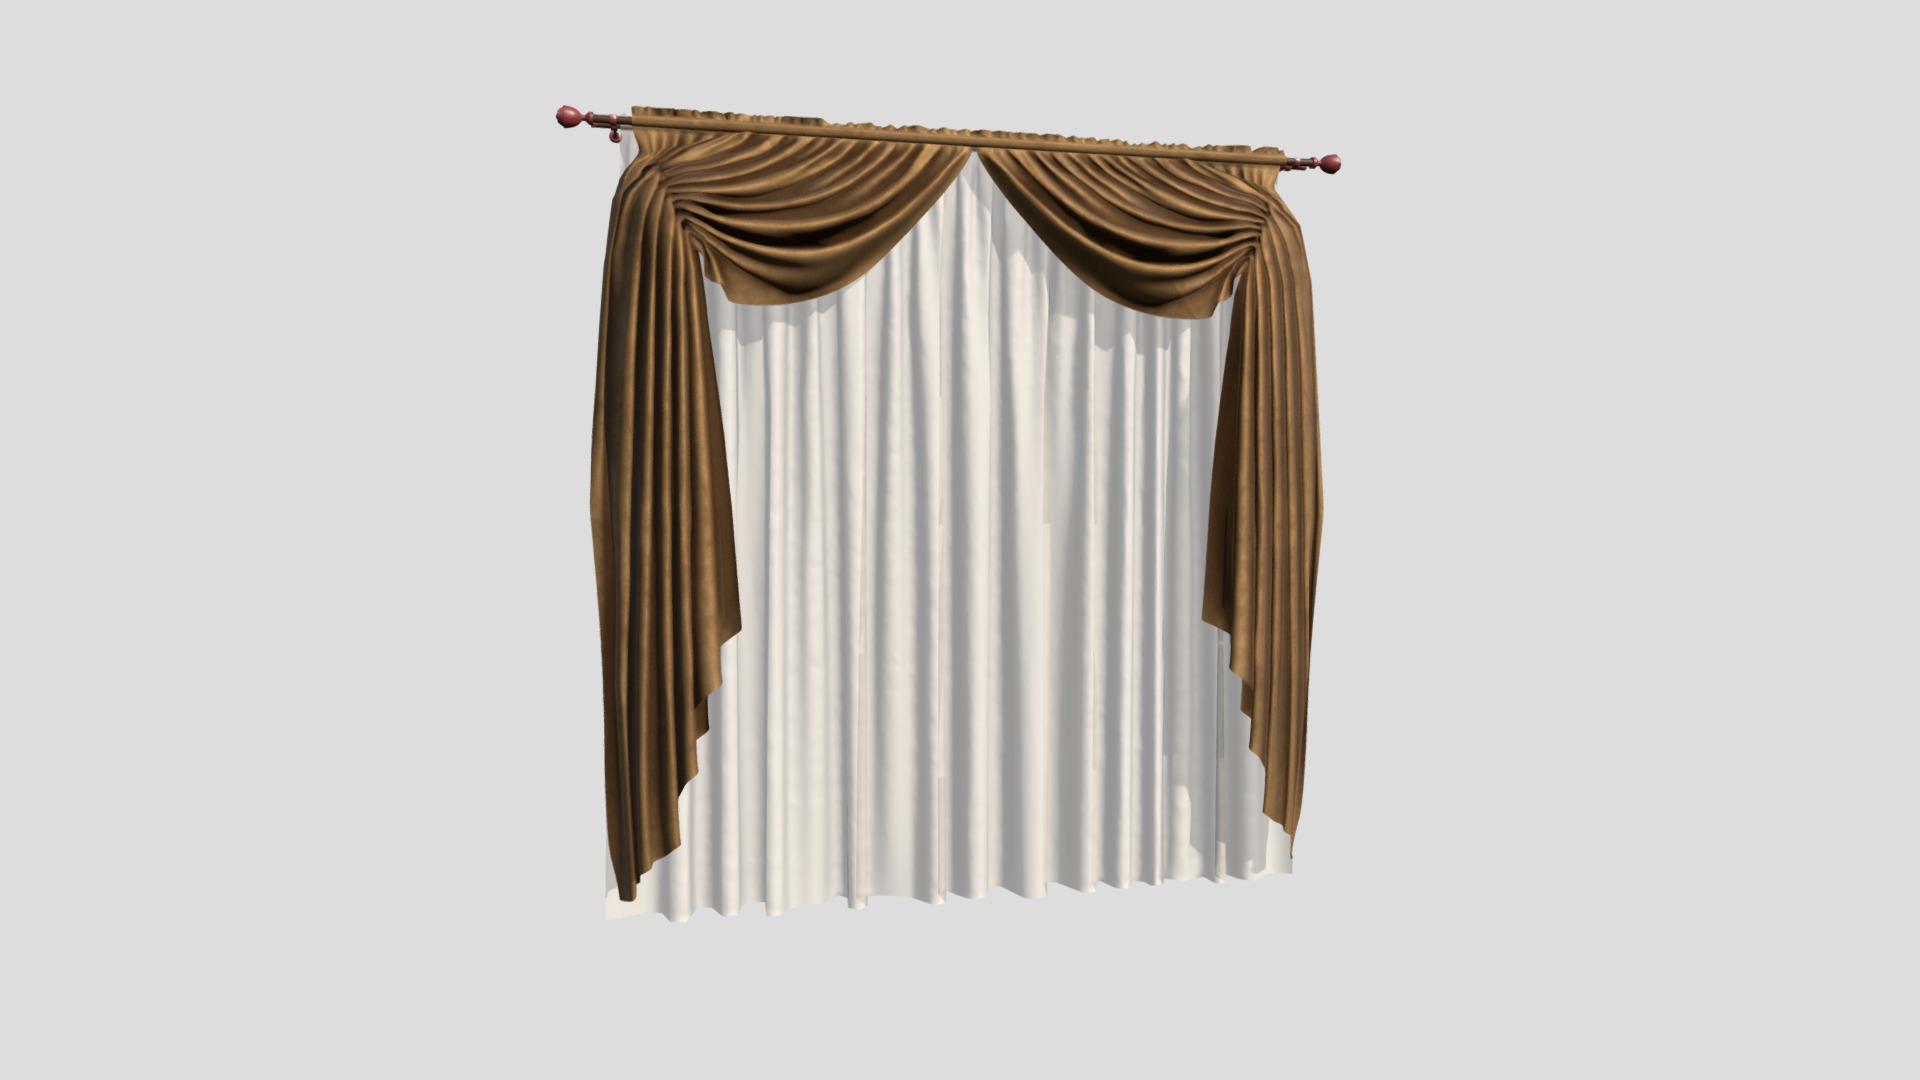 3D model №805 Curtain  3D low poly model for VR-projects - This is a 3D model of the №805 Curtain  3D low poly model for VR-projects. The 3D model is about text.